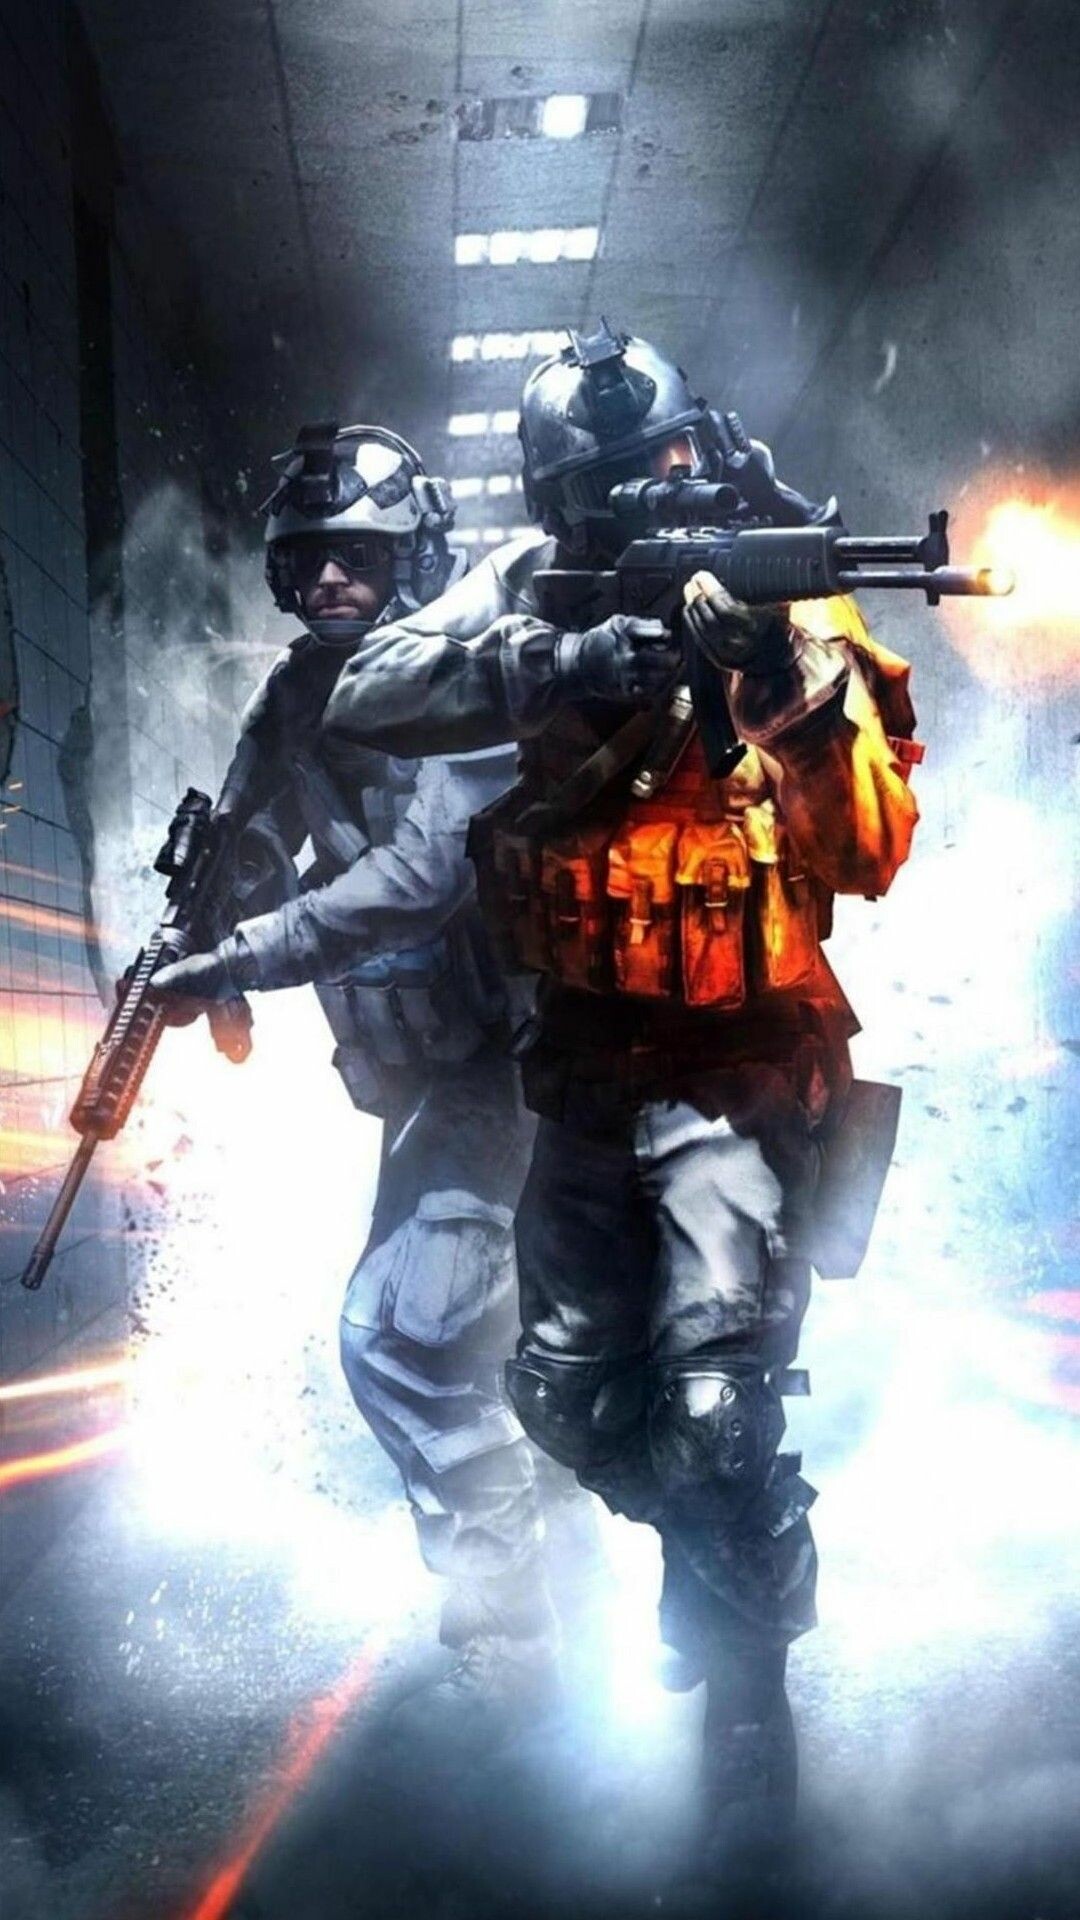 Battlefield 3: BF4, Military, Playable characters. 1080x1920 Full HD Background.